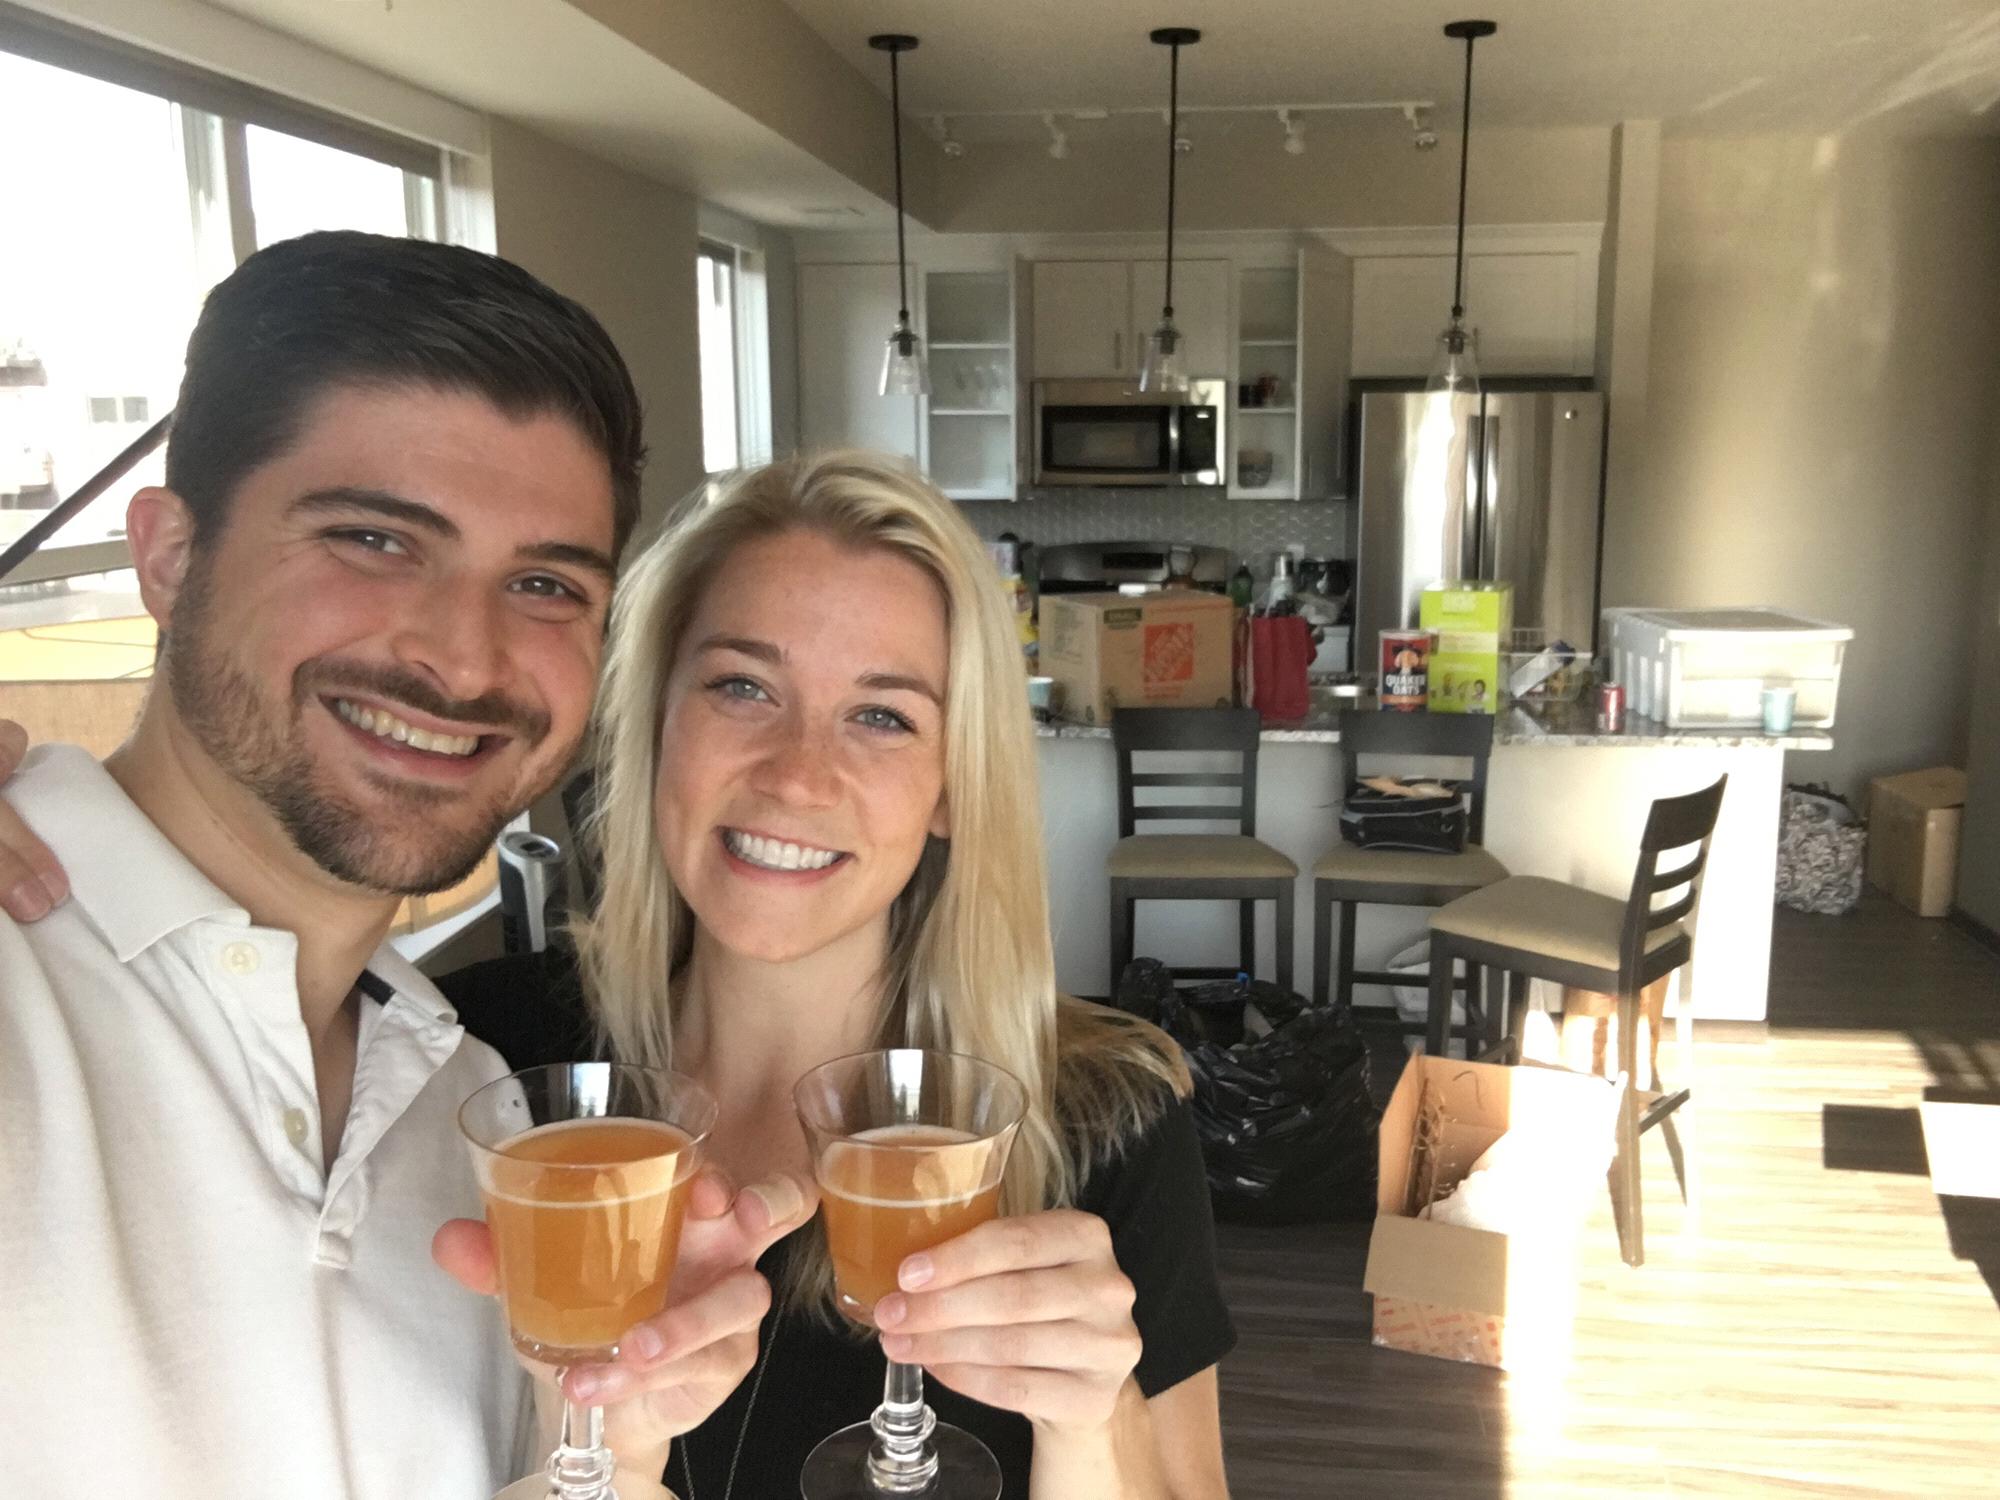 Our first apartment together (2018)